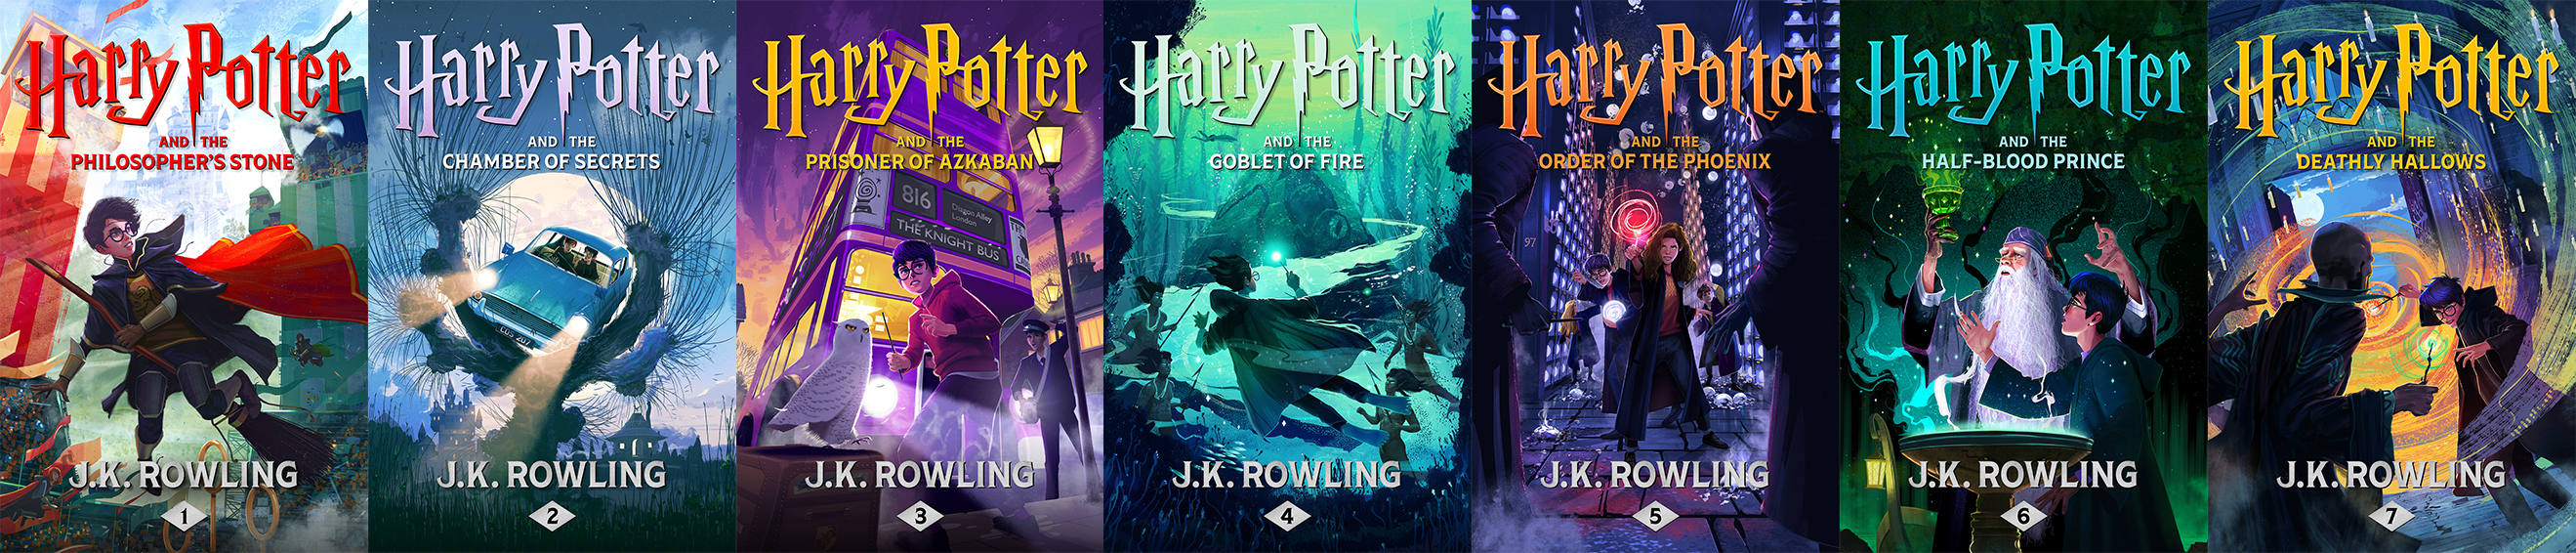 Dynamic New Cover Art for Harry Potter eBooks and Audiobooks Revealed